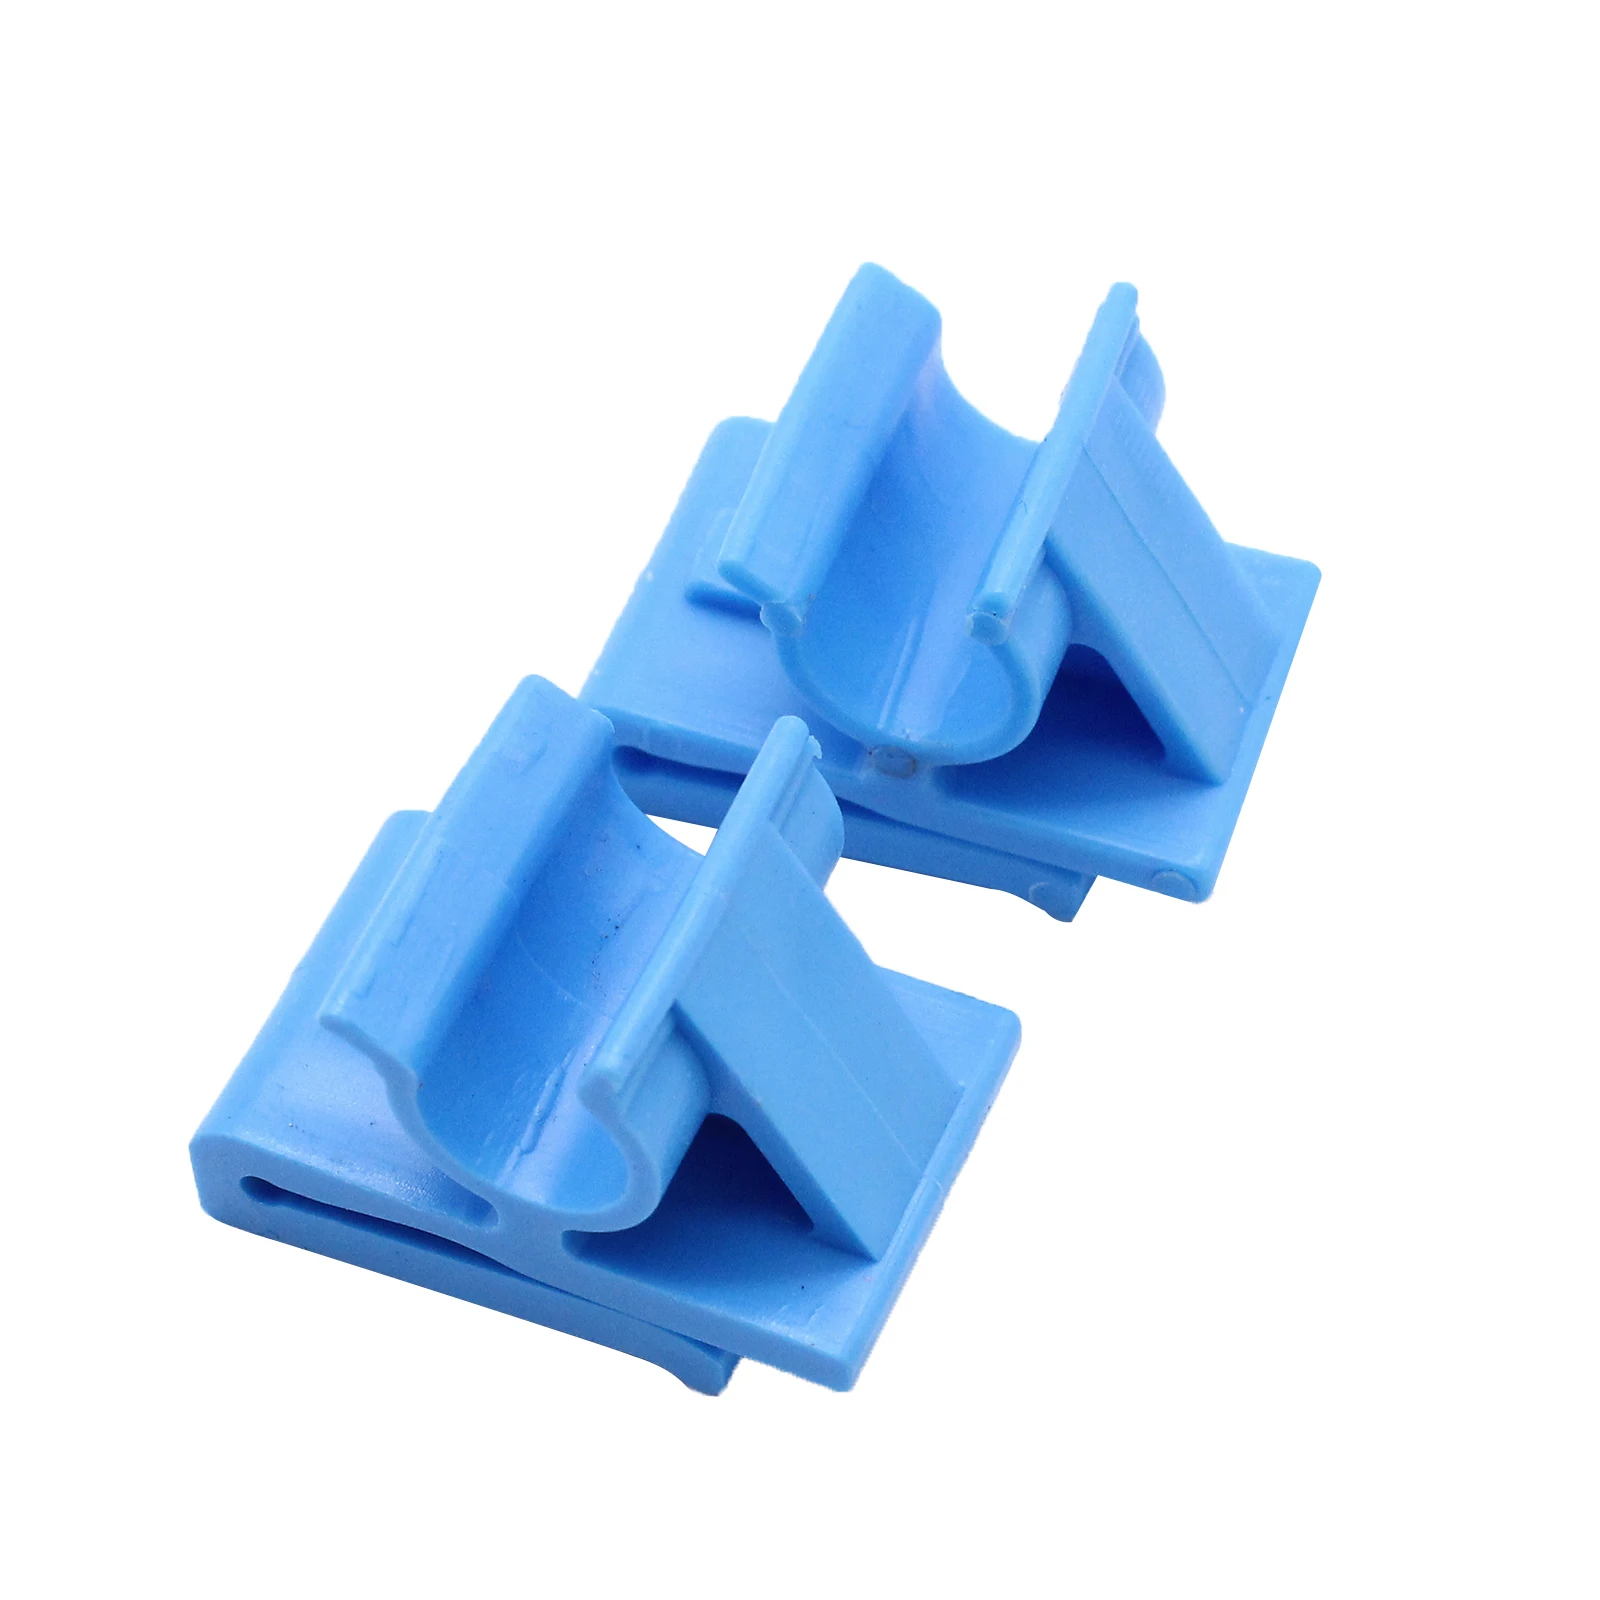 2Pcs Blue Lower Glove Box Clips Modified Accessories Fix Parts Fit for Holden Car Commodore VY WK